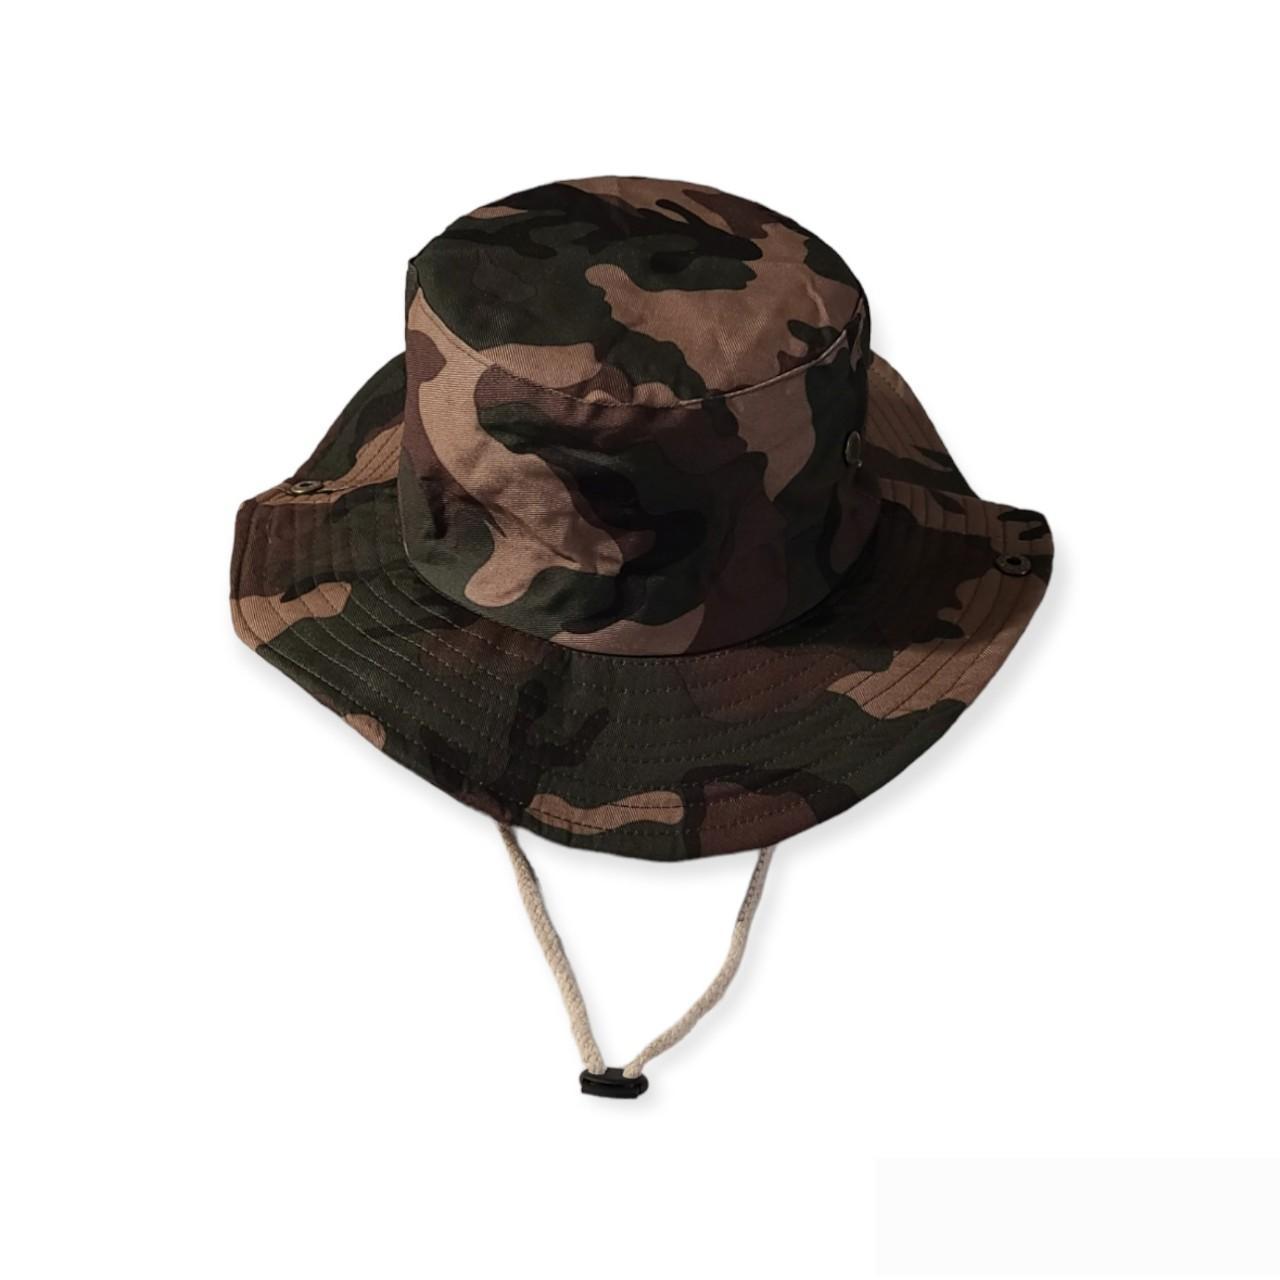 New Camouflage fishing hat one size fits all - Depop